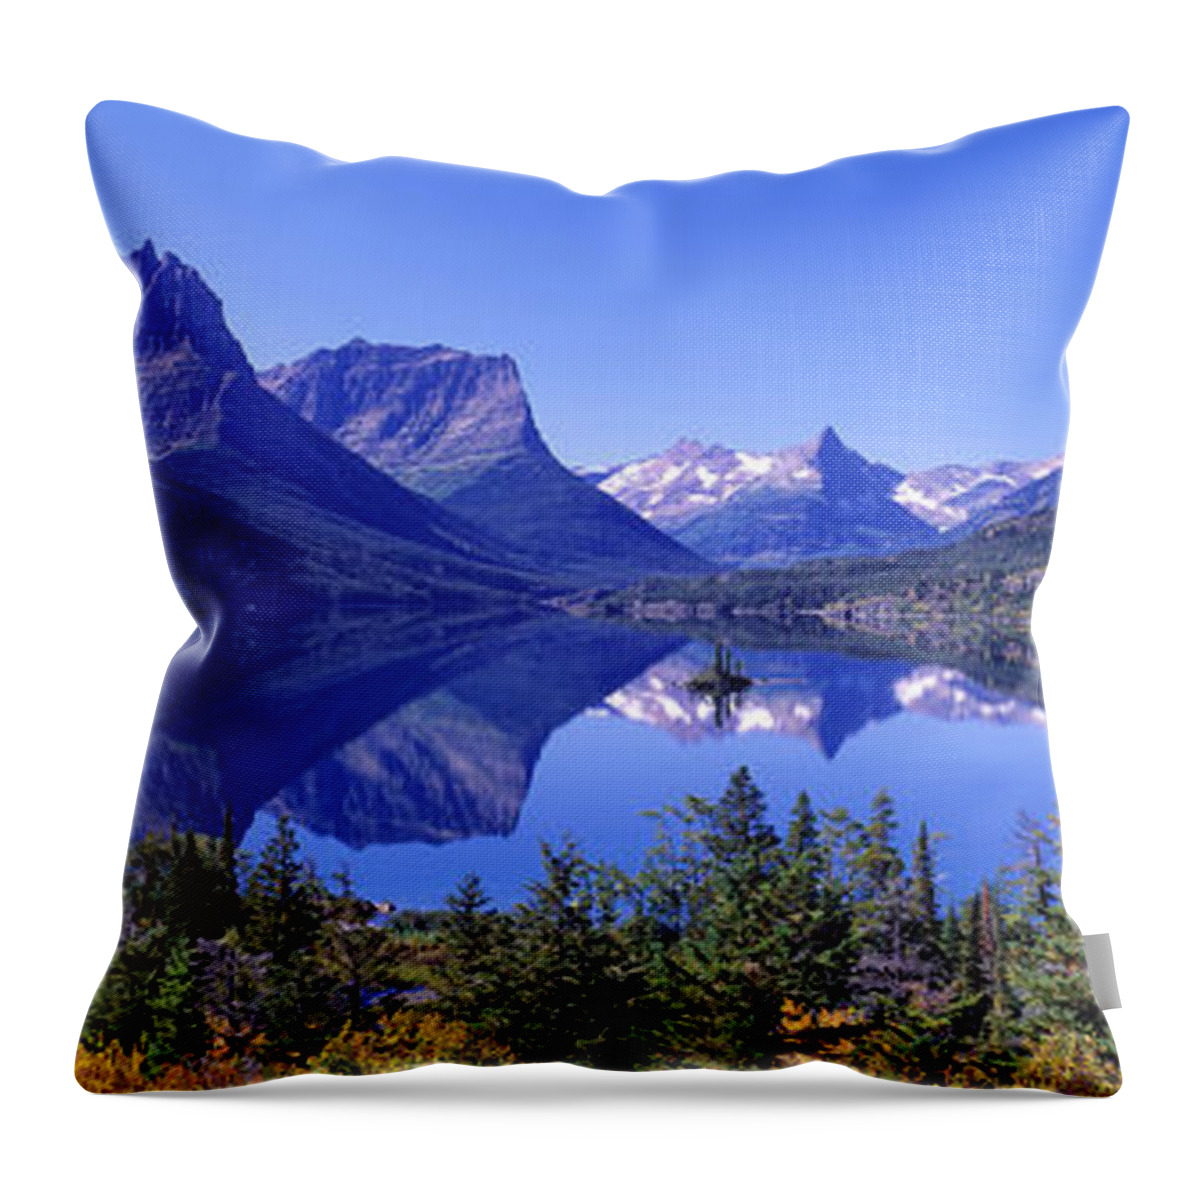 Photography Throw Pillow featuring the photograph St Mary Lake Glacier National Park Mt by Panoramic Images